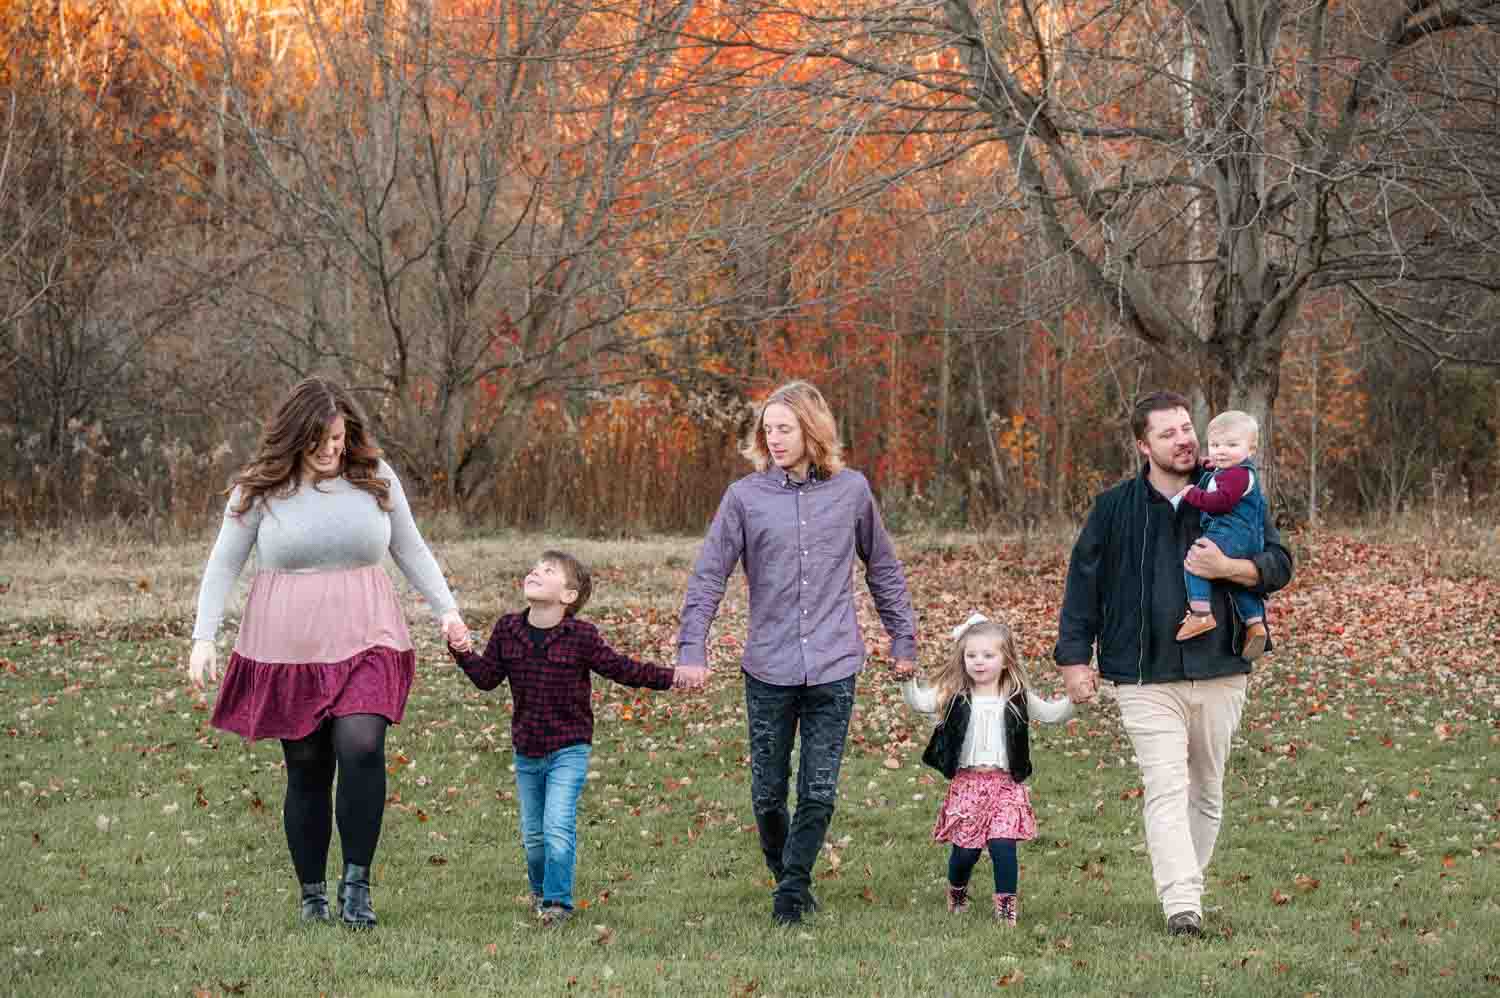 Family walking together holding hands in fall